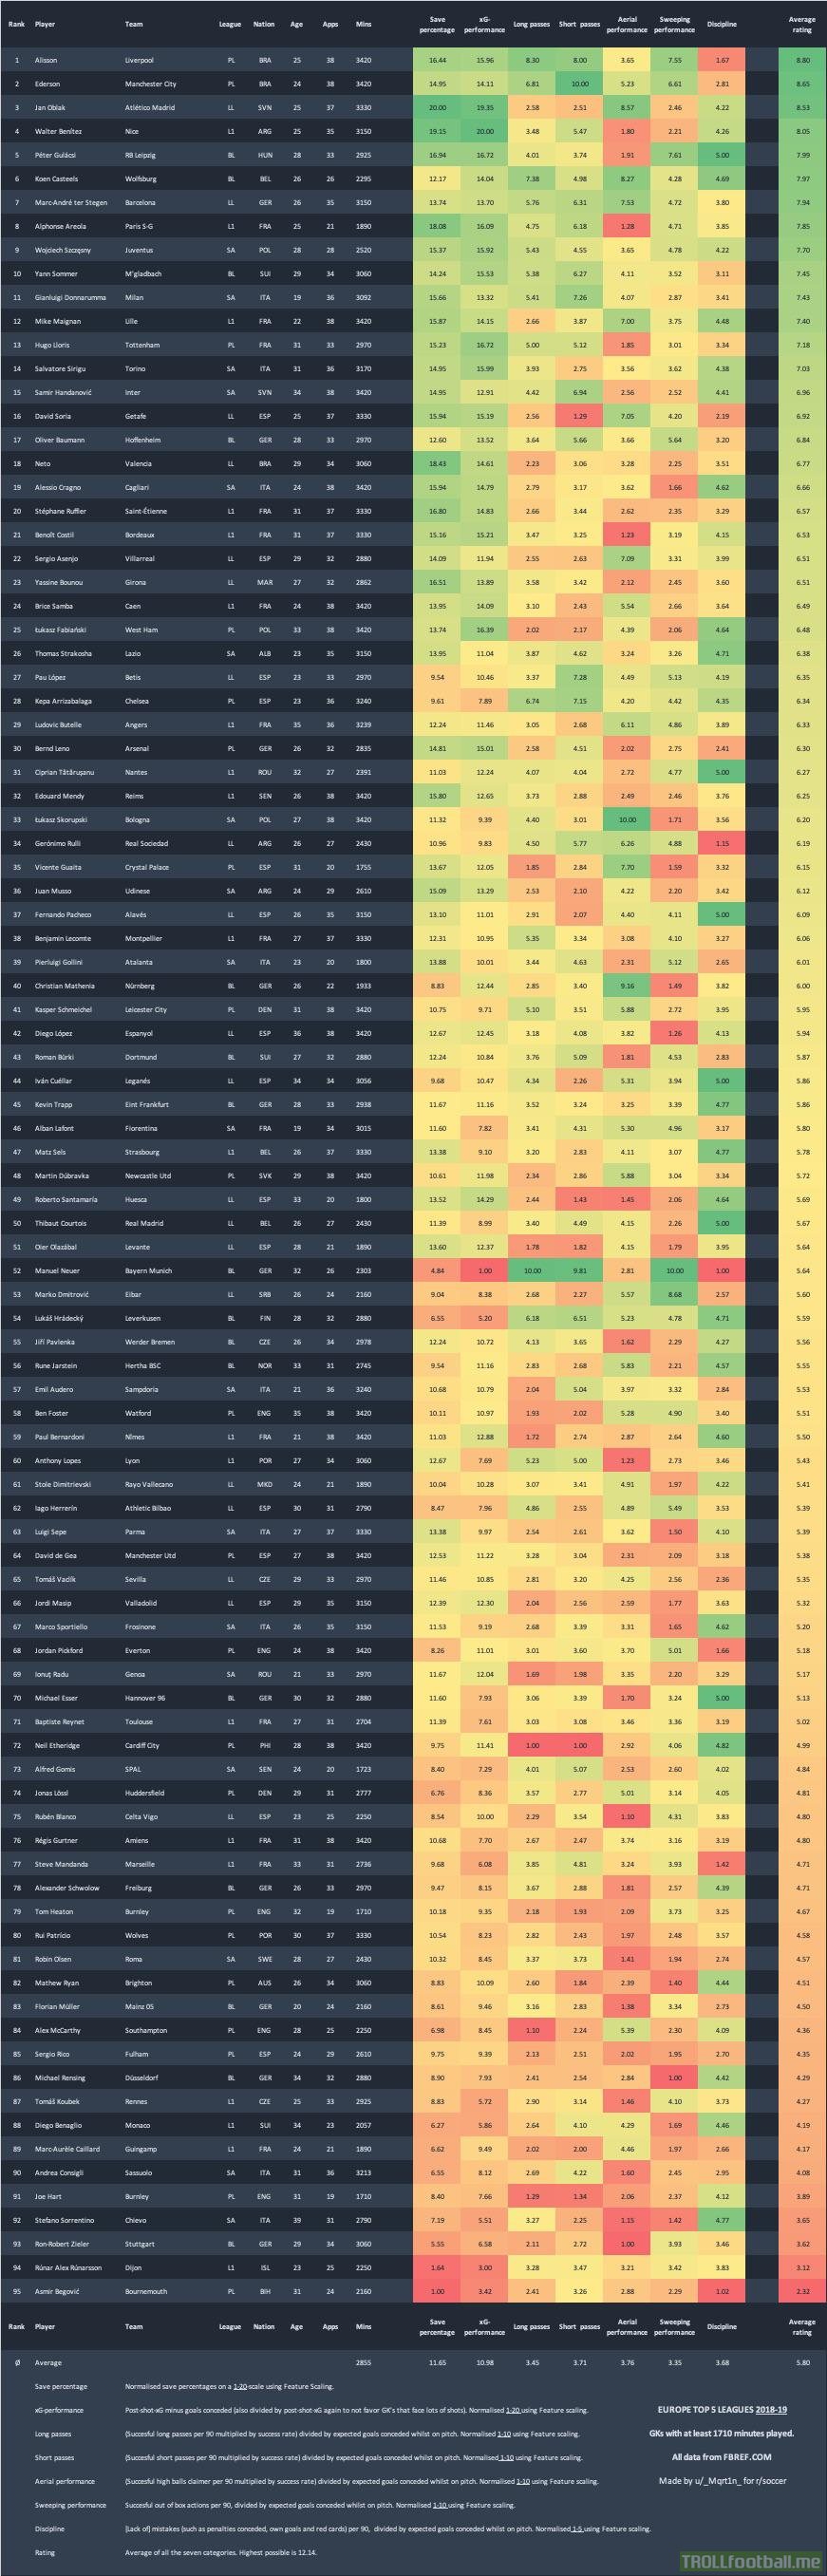 [OC] Detailed visual comparison of data for 95 goalkeepers across the top five leagues in Europe (18/19 season). Further info at the bottom of the picture.